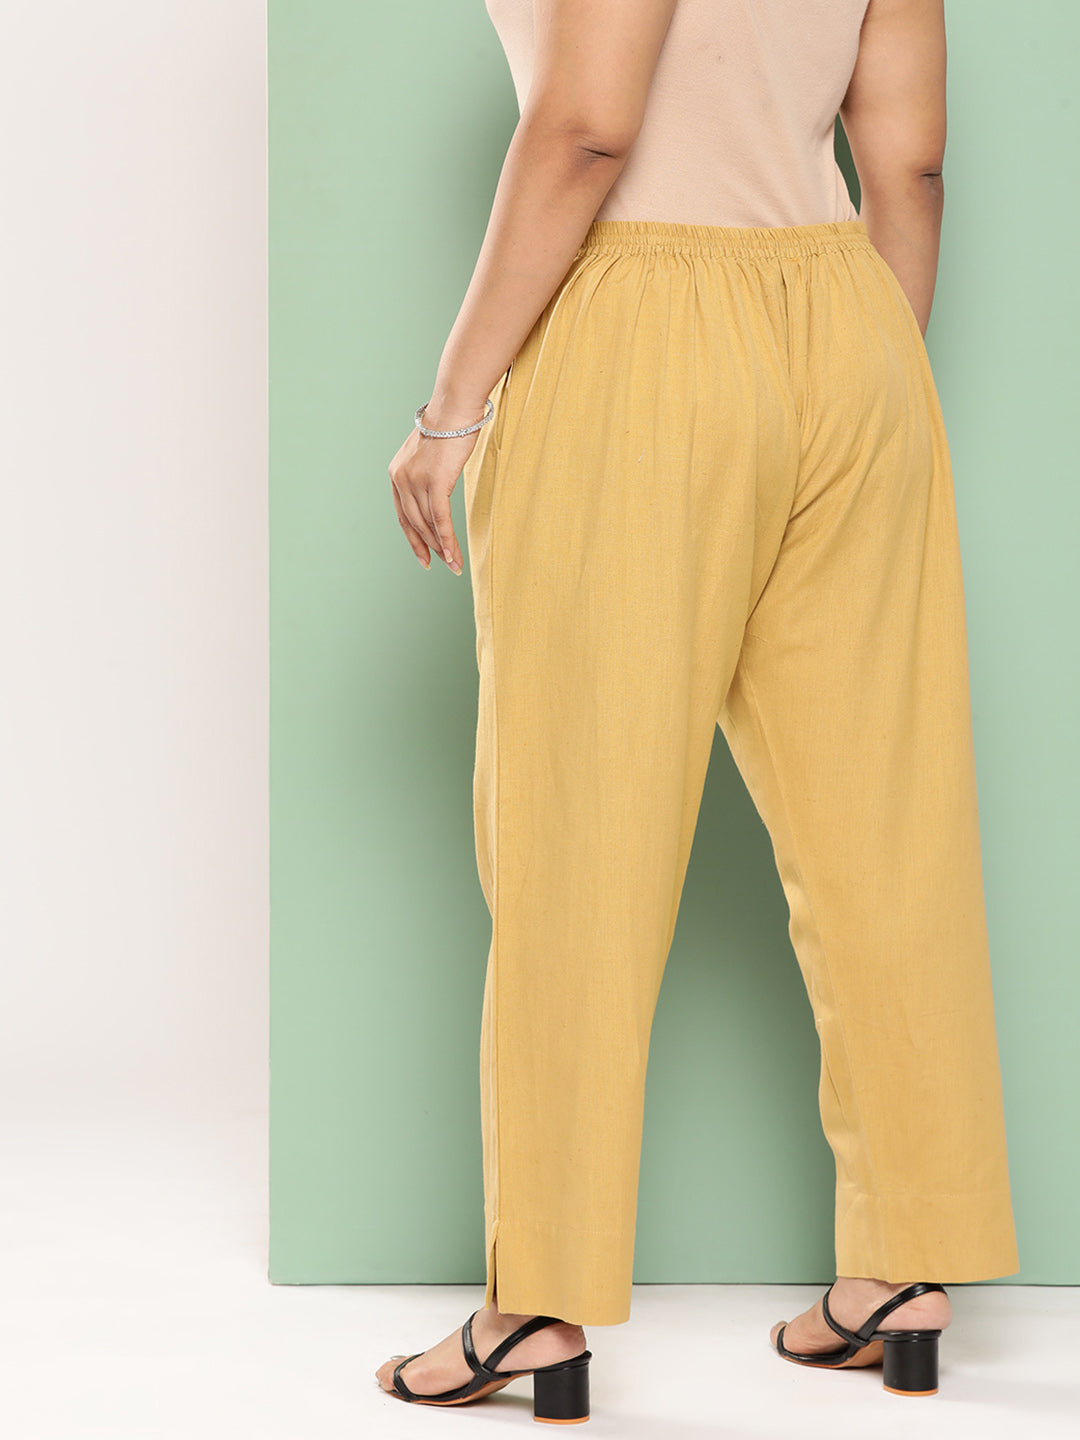 Slim Fit Pure Cotton Yellow Trousers